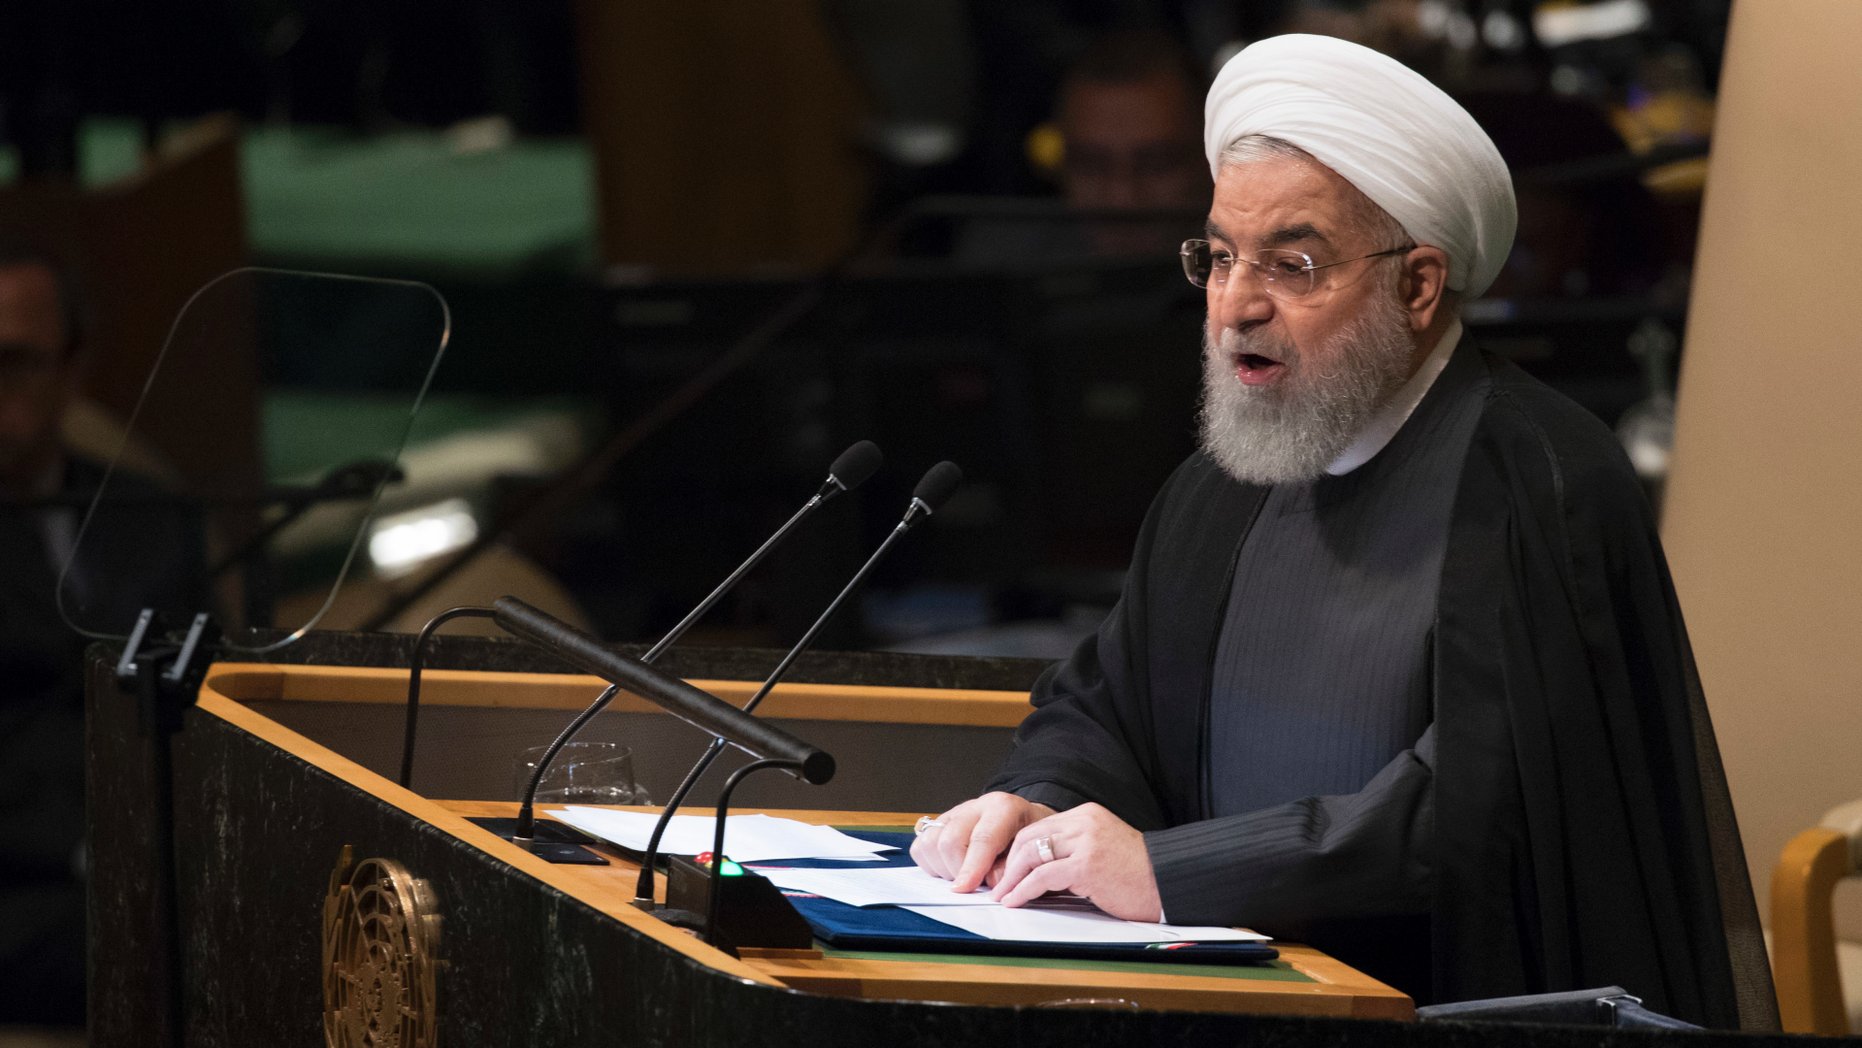 Iranian President Hassan Rouhani addressing the 73rd session of the United Nations General Assembly, Tuesday, Sept. 25, 2018 at U.N. headquarters. (AP Photo/Mary Altaffer, File)